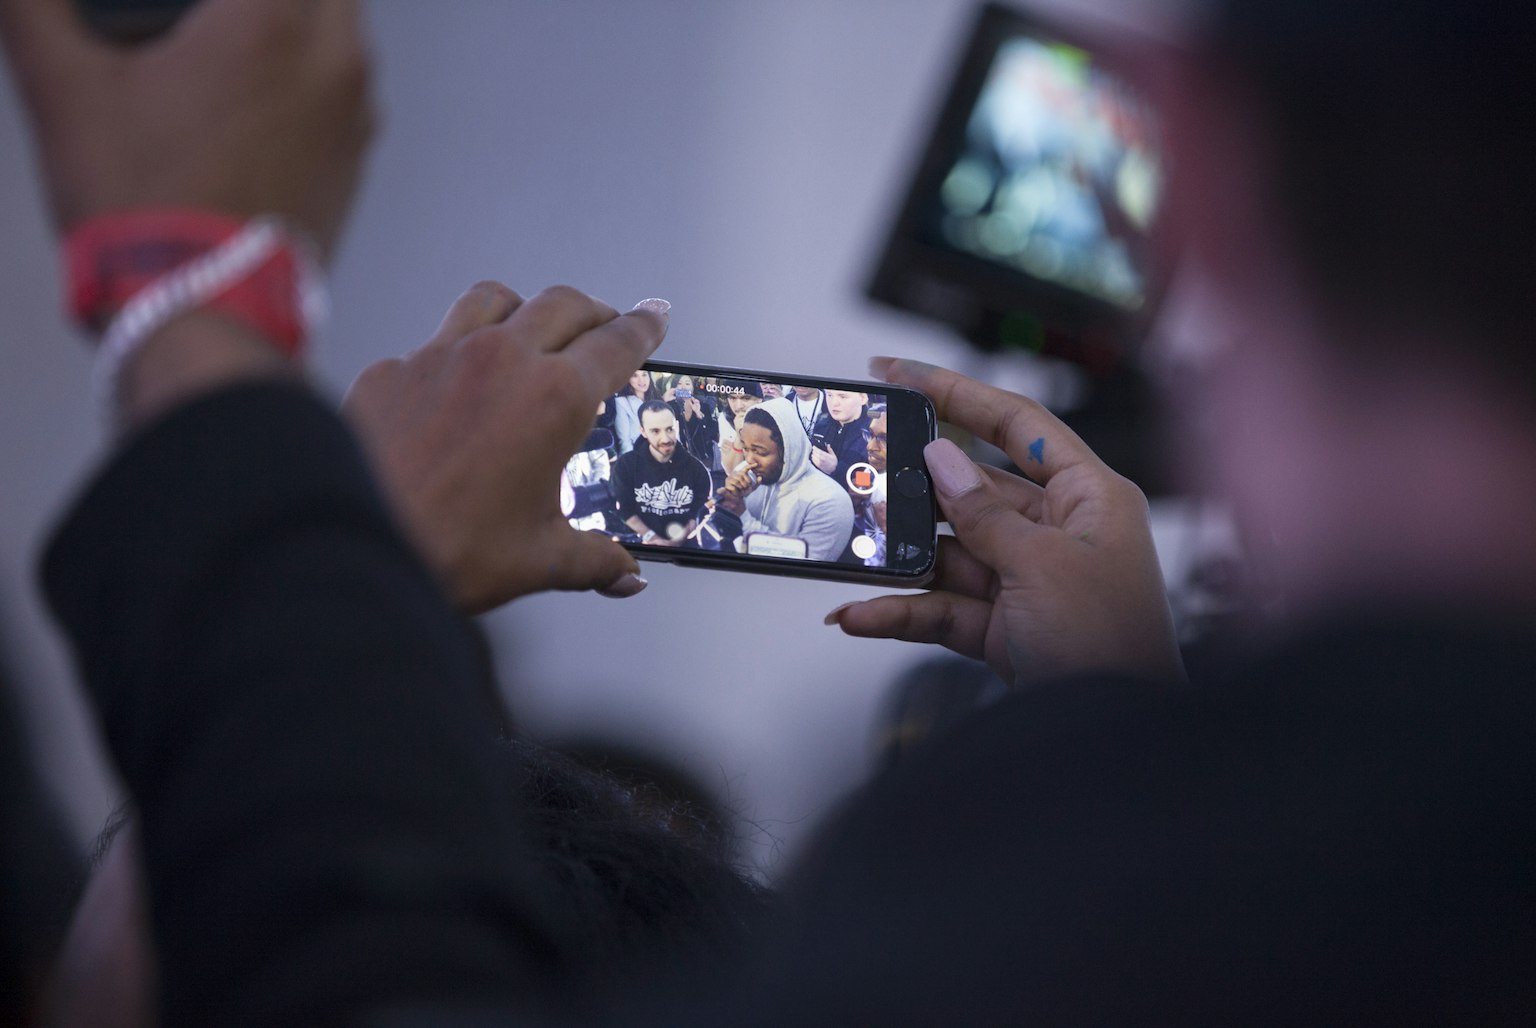 A close-up of someone's hands holding a smart phone. They are recording a group of musicians rapping with Kendrick Lamar.